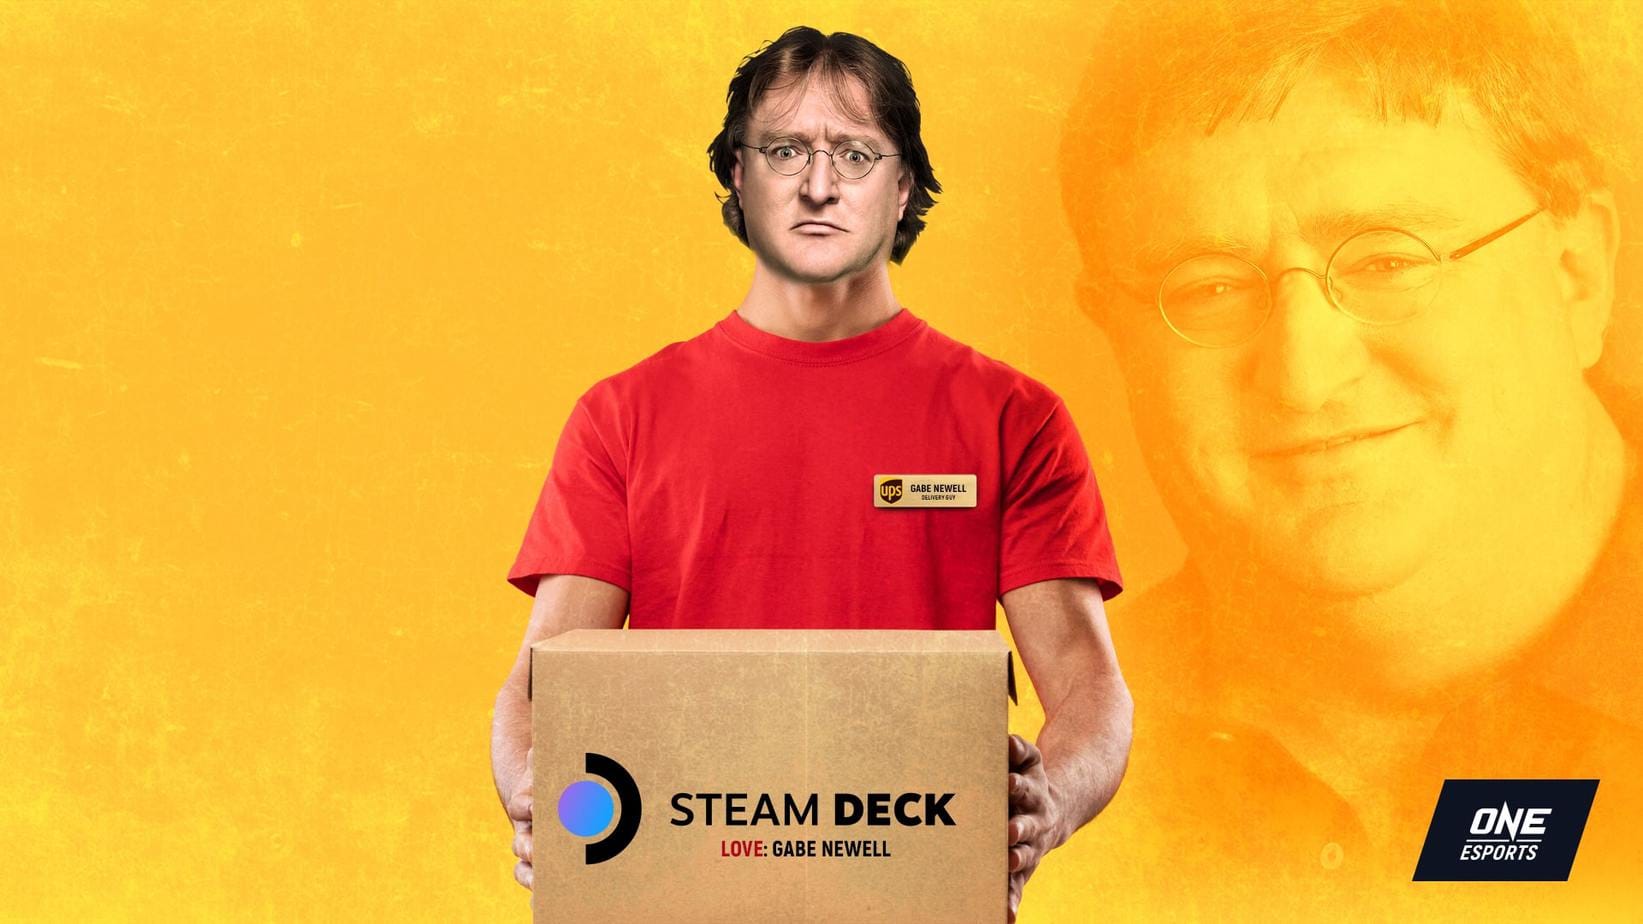 Gabe Newell delivering Steam Deck himself while reminiscing about